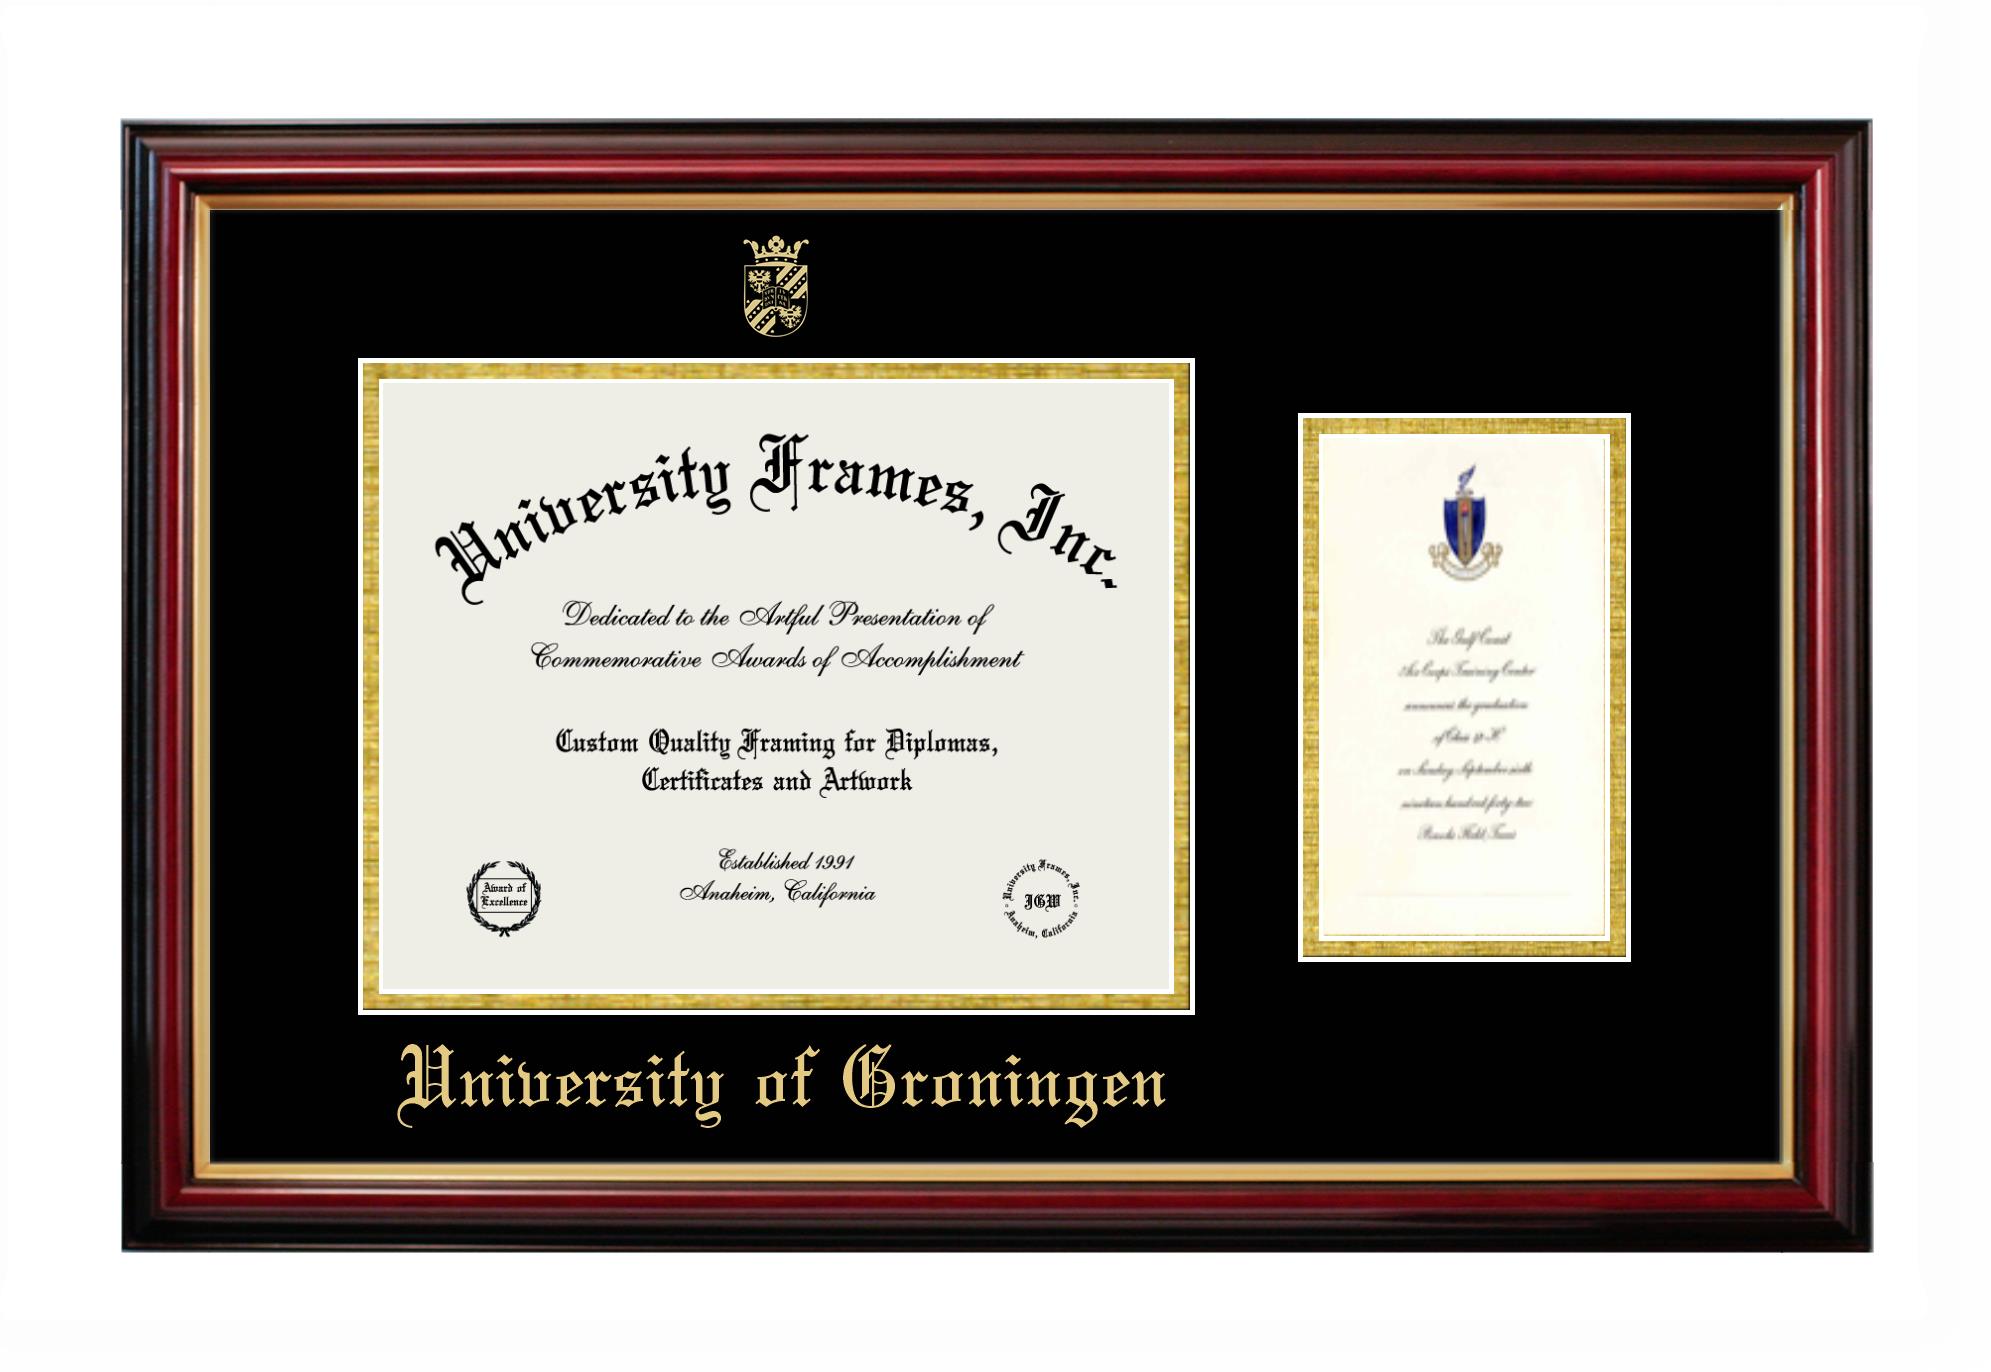 Papua Ny Guinea Vedhæftet fil Konsultation University of Groningen Diploma with Announcement Frame in Petite Mahogany  with Gold Trim with Black & Gold Mats